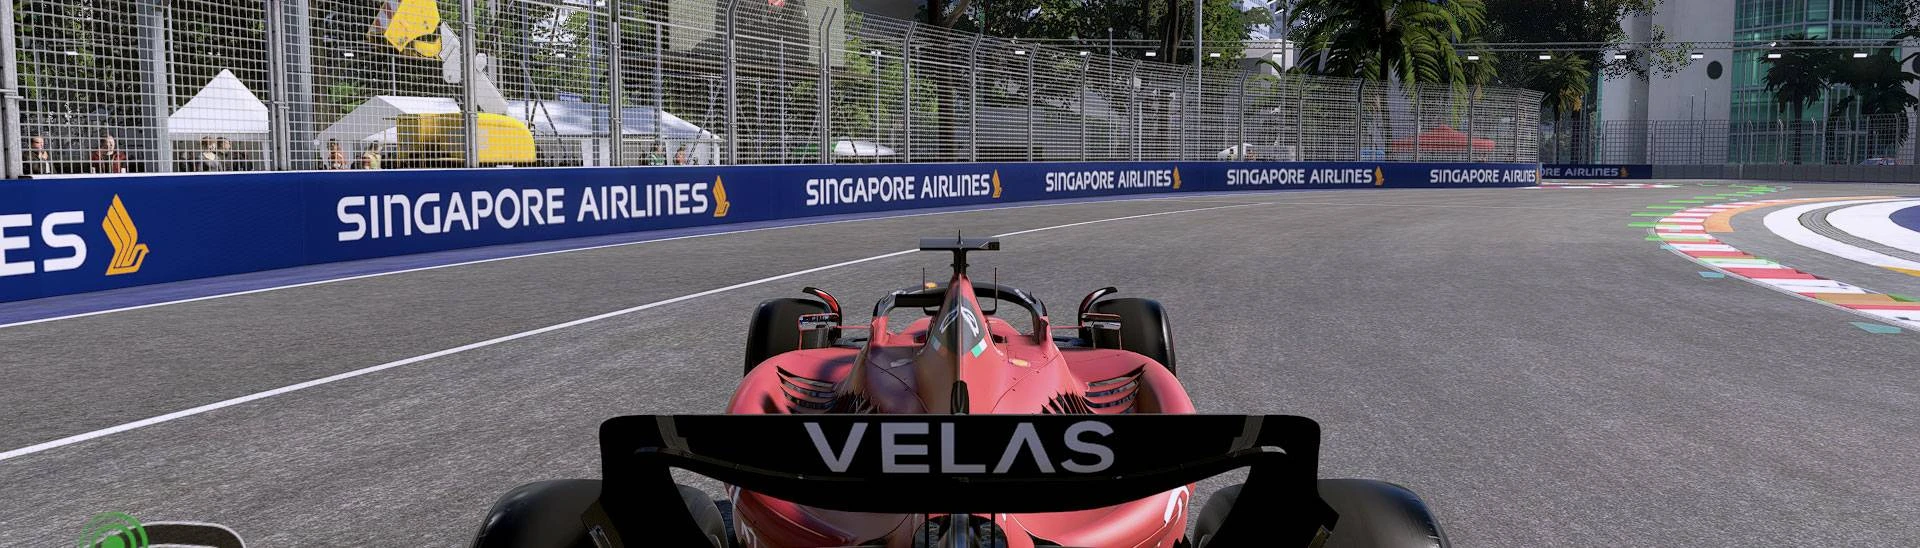 How VR came to be in F1 22